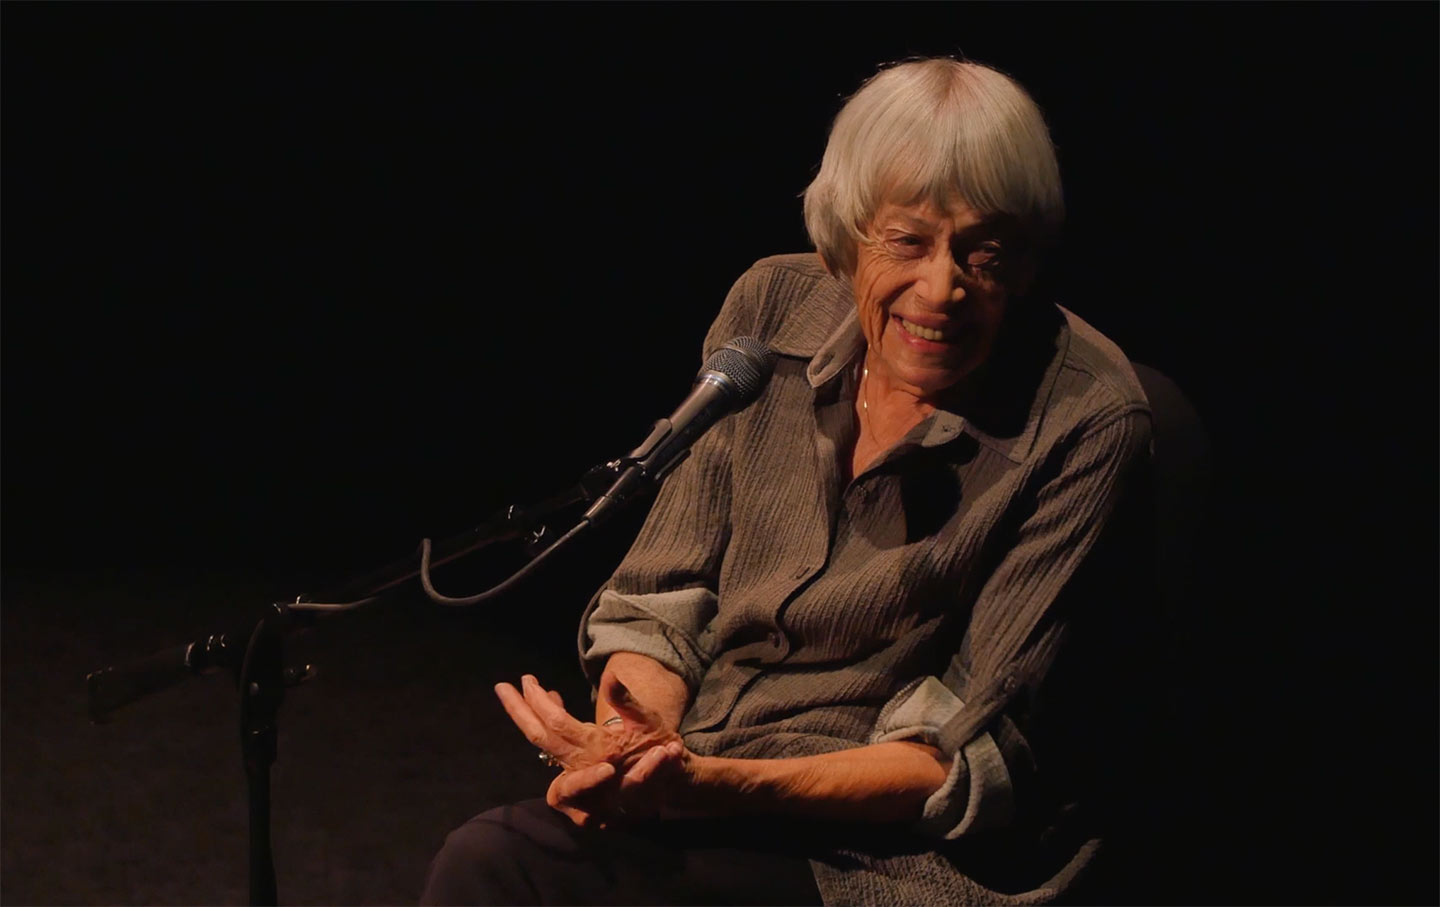 VIDEO: Ursula K. Le Guin on Listening to the Unheard Voices